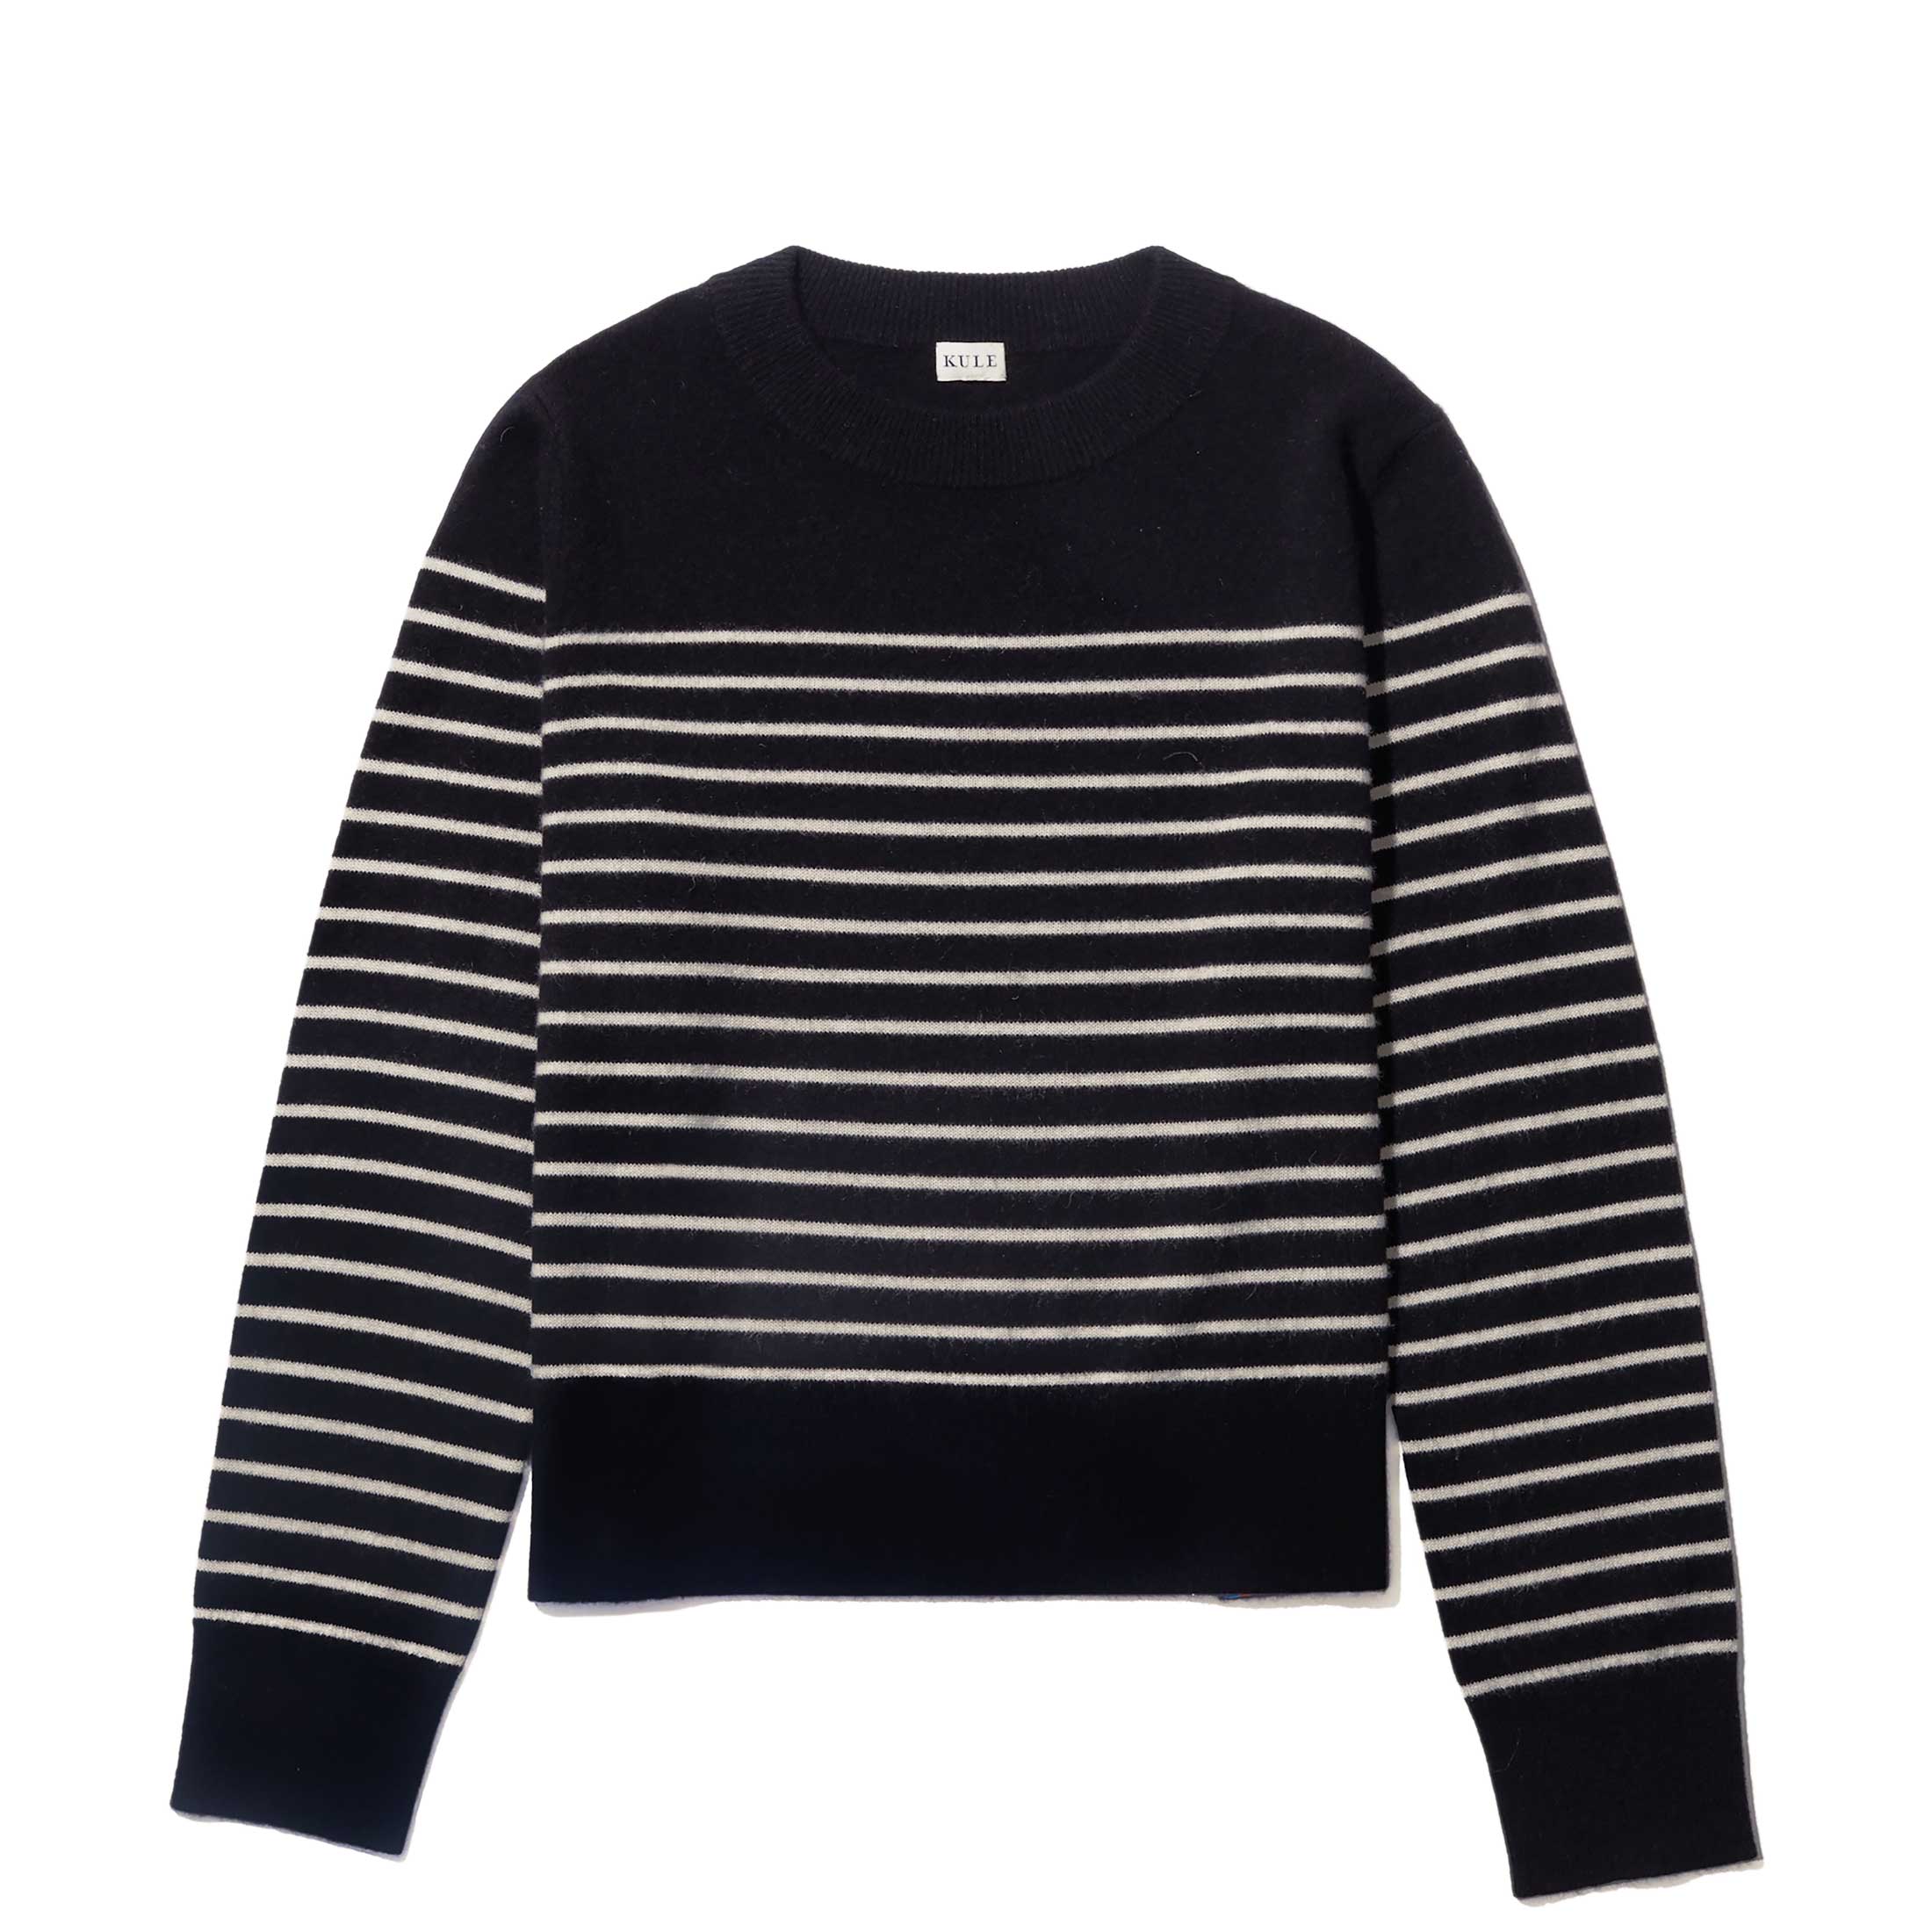 LifeShe Women's Men Striped Sweater Pullovers Oversized Knitted Jumpers  Sweatershirts Streetwear